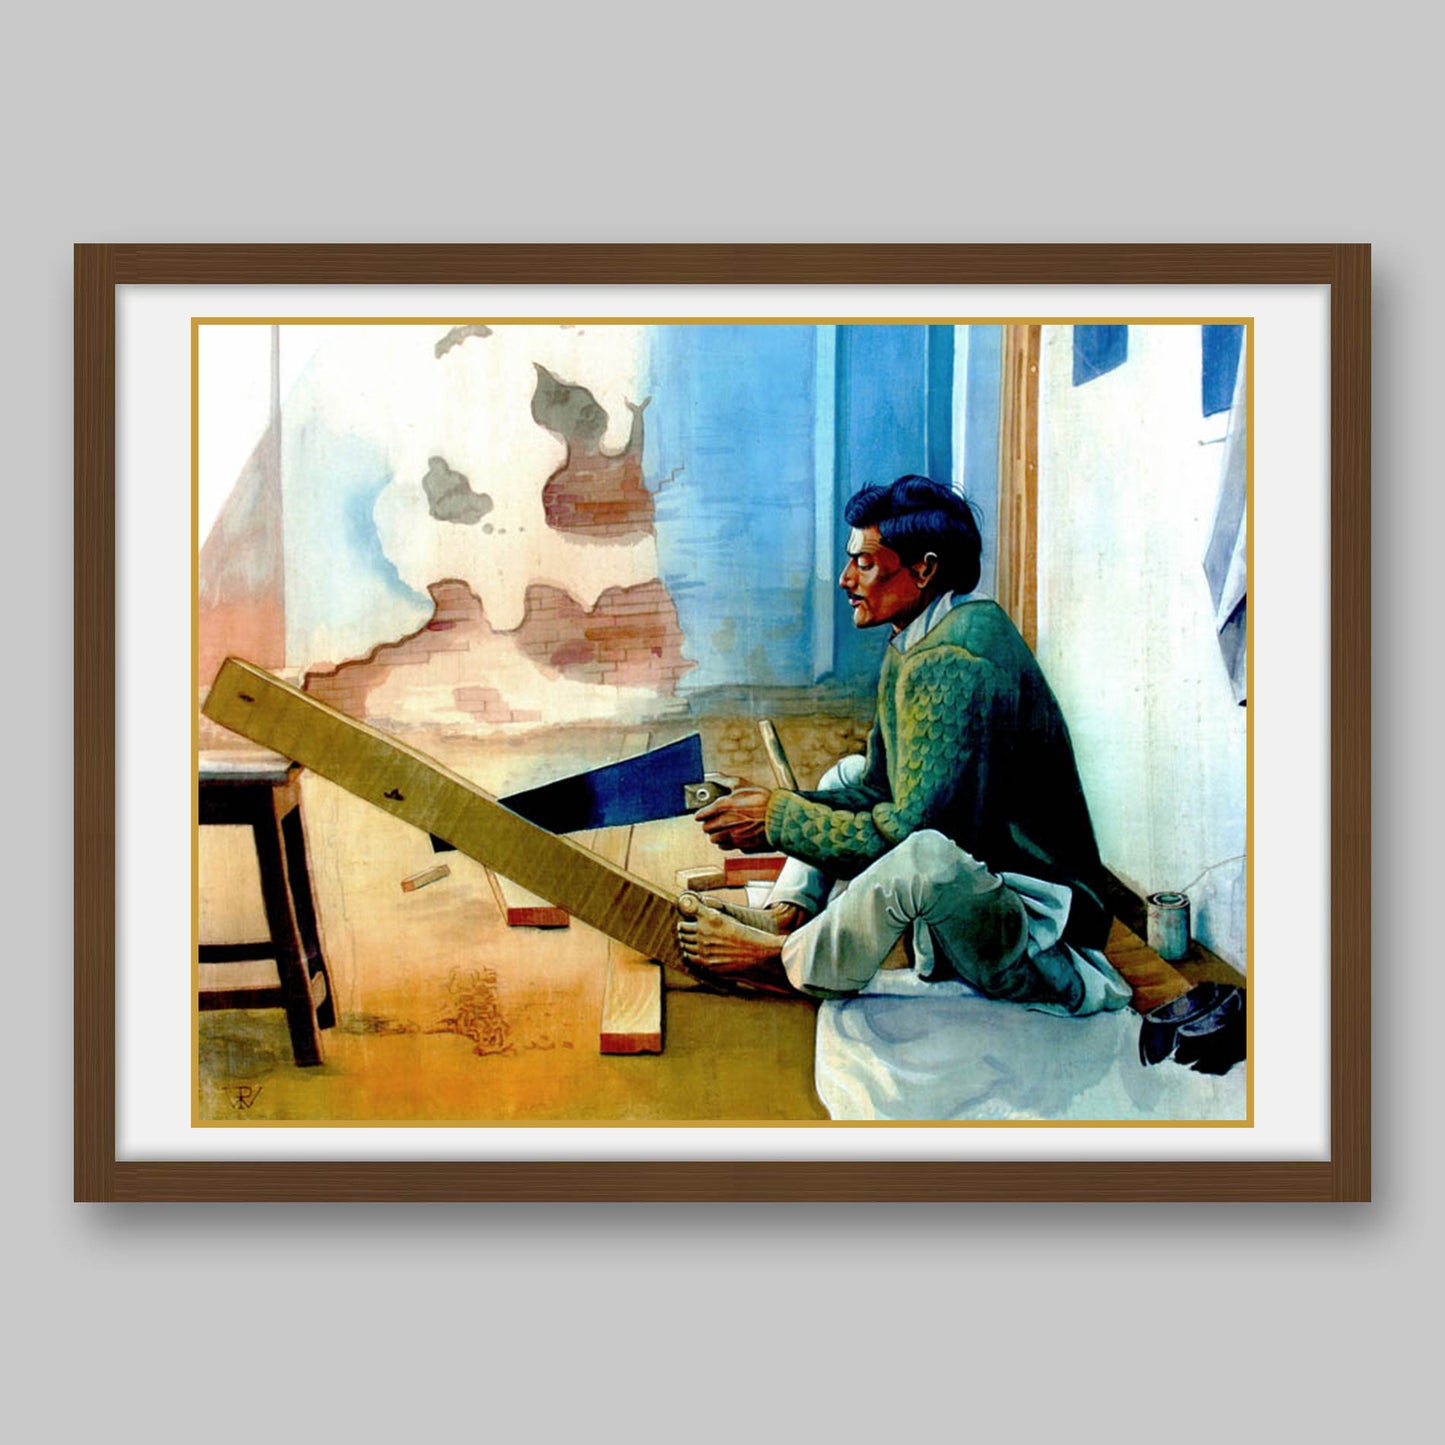 Man using a Saw Machine - High Quality Print of Artwork by Pieter Weltevrede